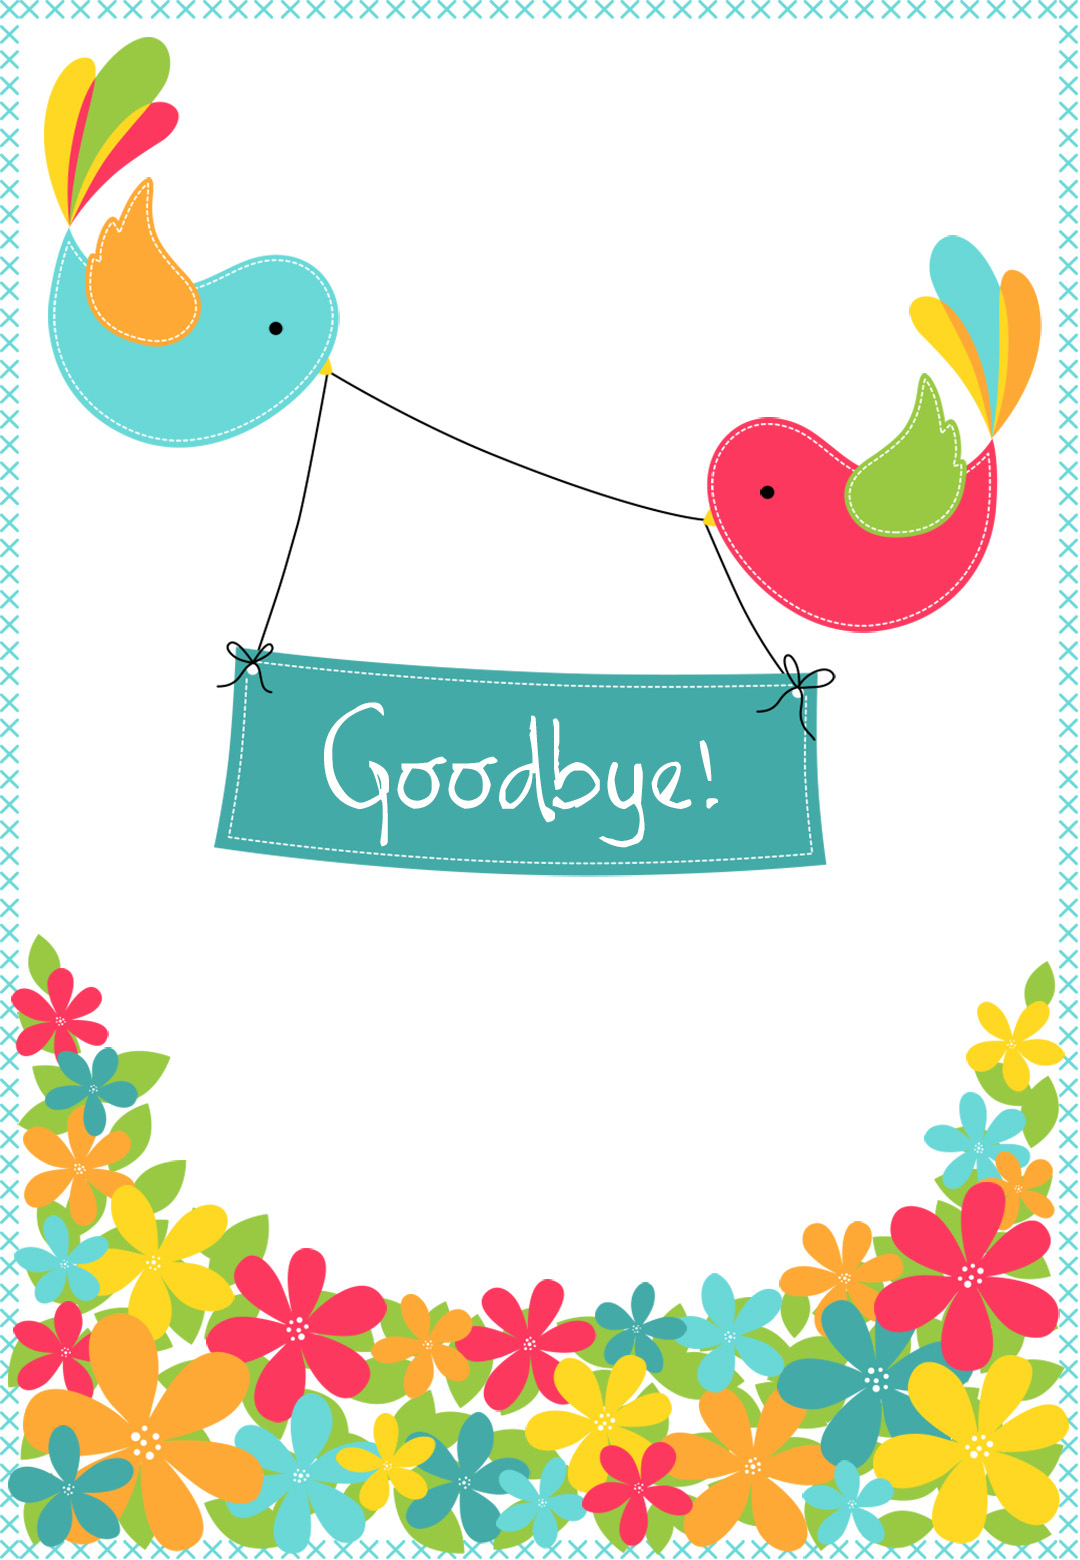 Goodbye From Your Colleagues - Free Good Luck Card | Greetings Island - Free Printable Good Luck Cards